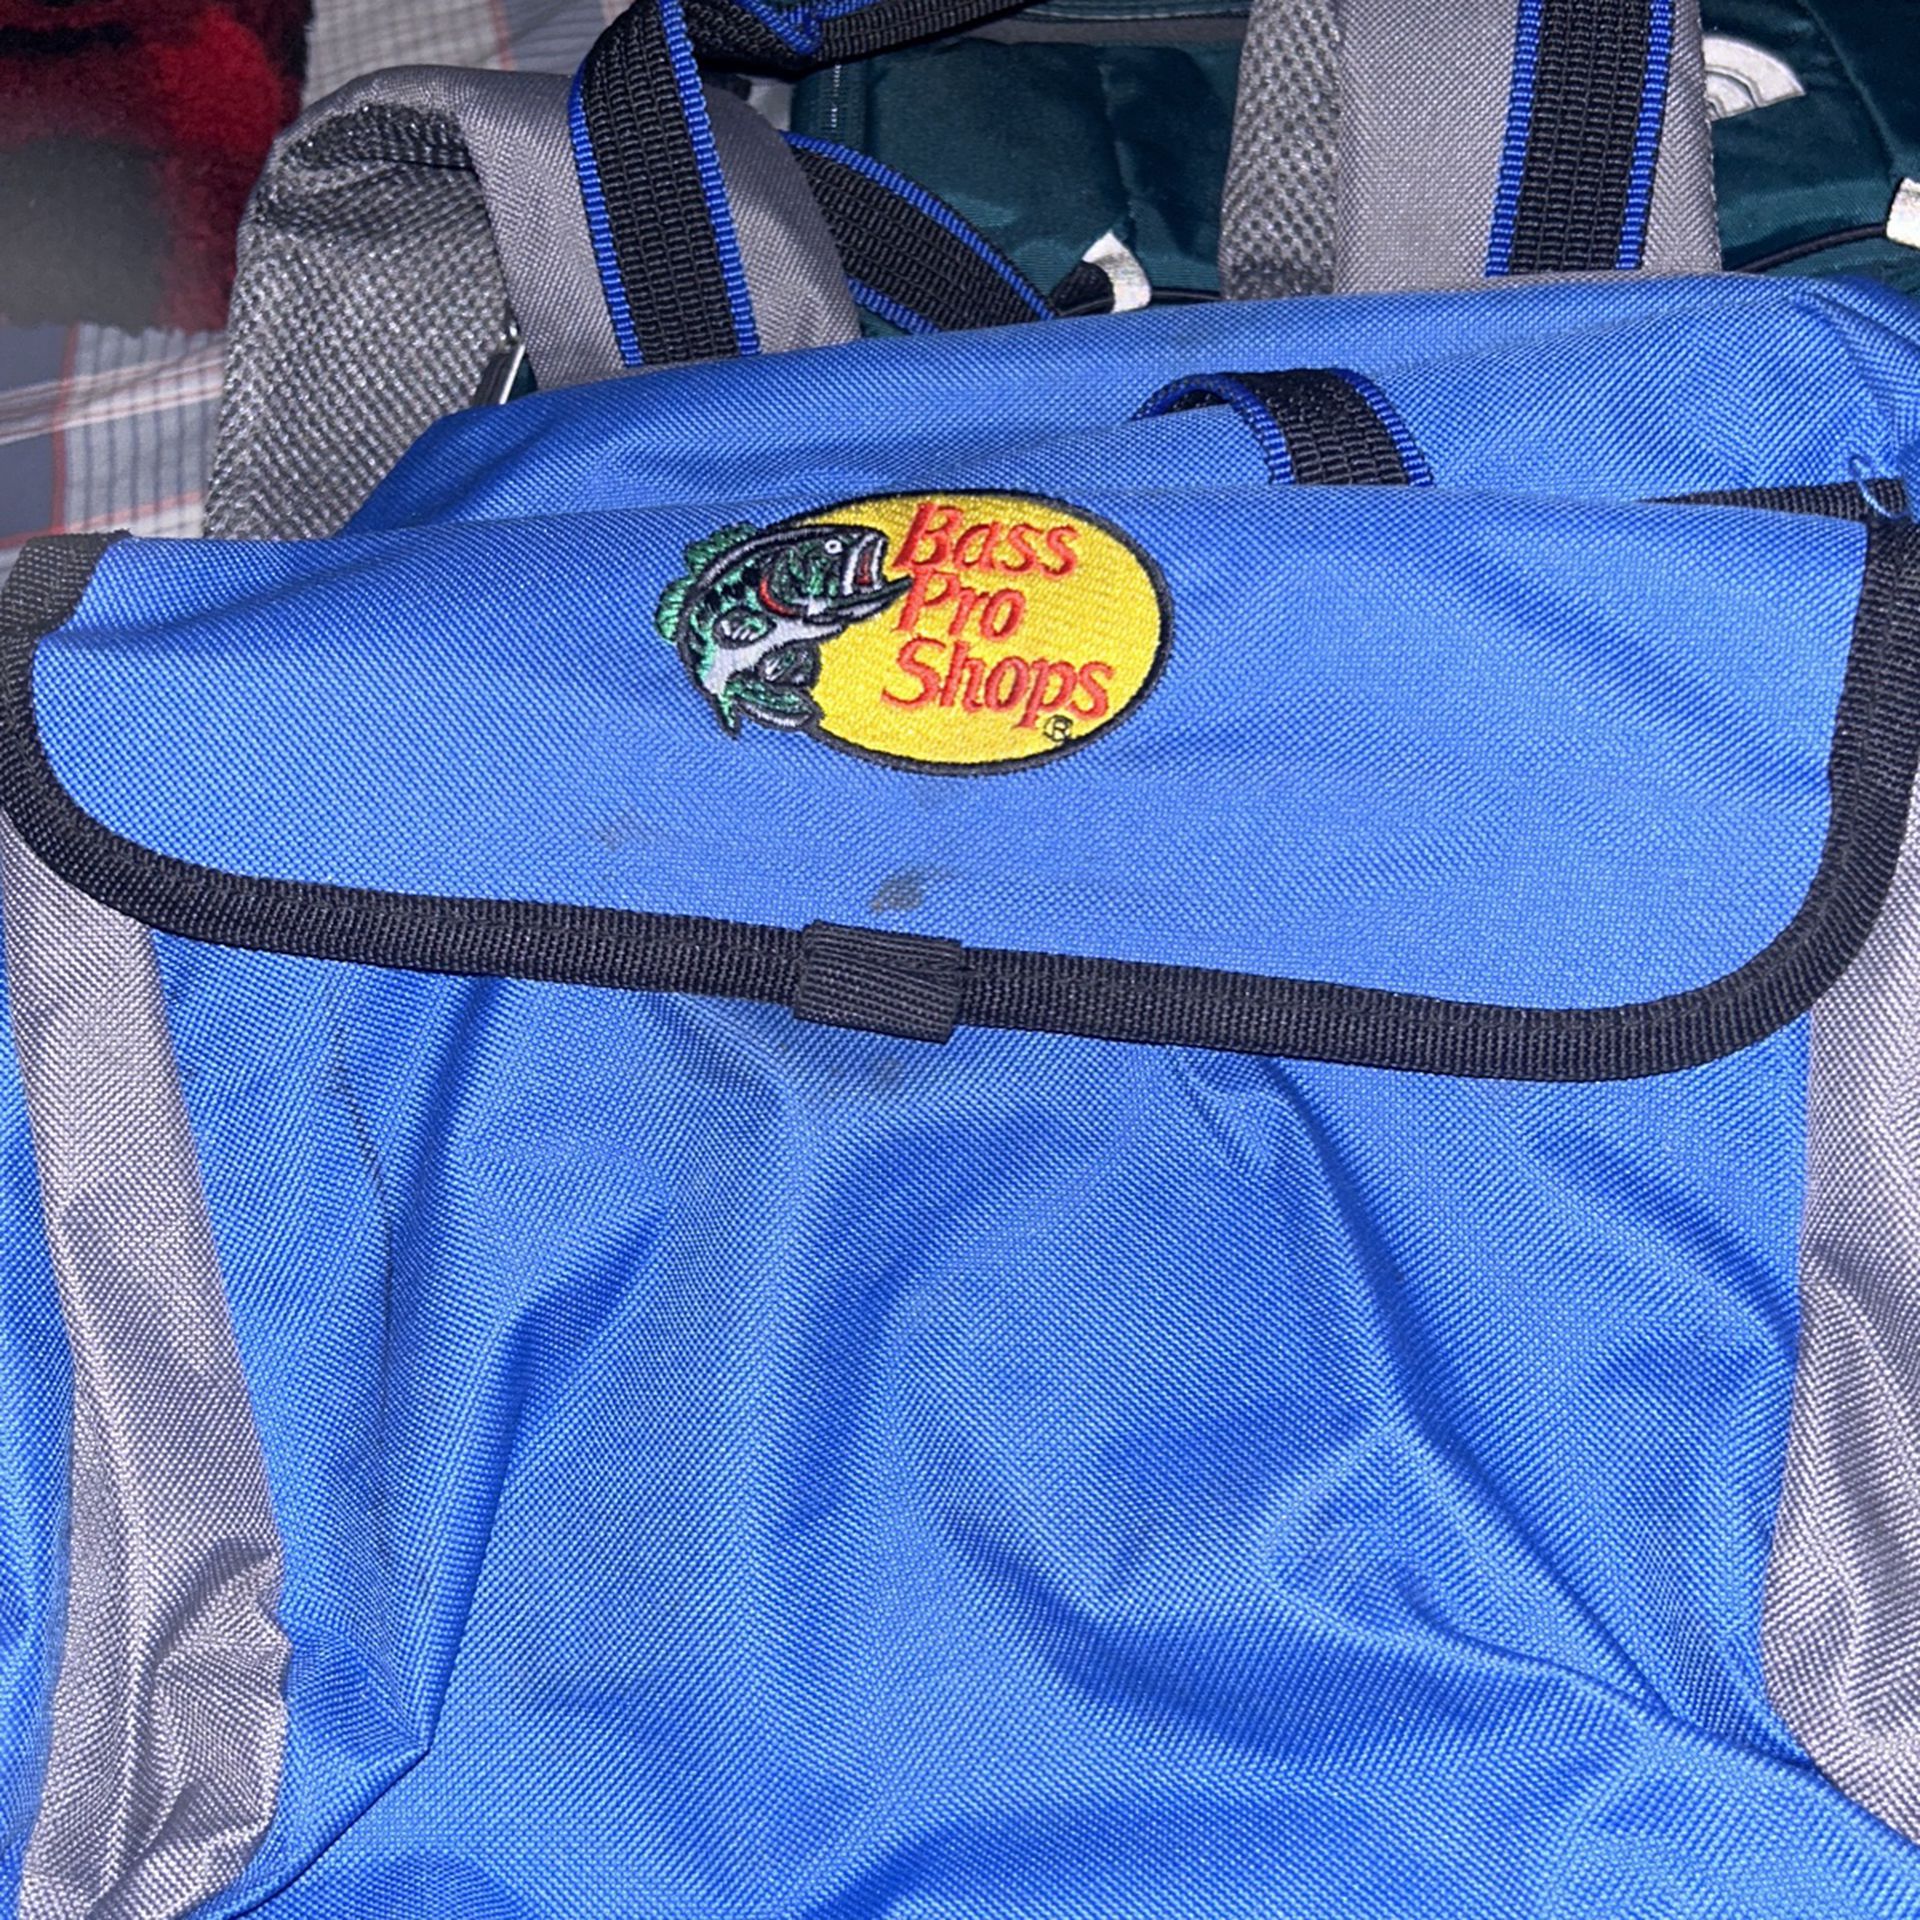 Bass Pro Shops 2 In One Backpack